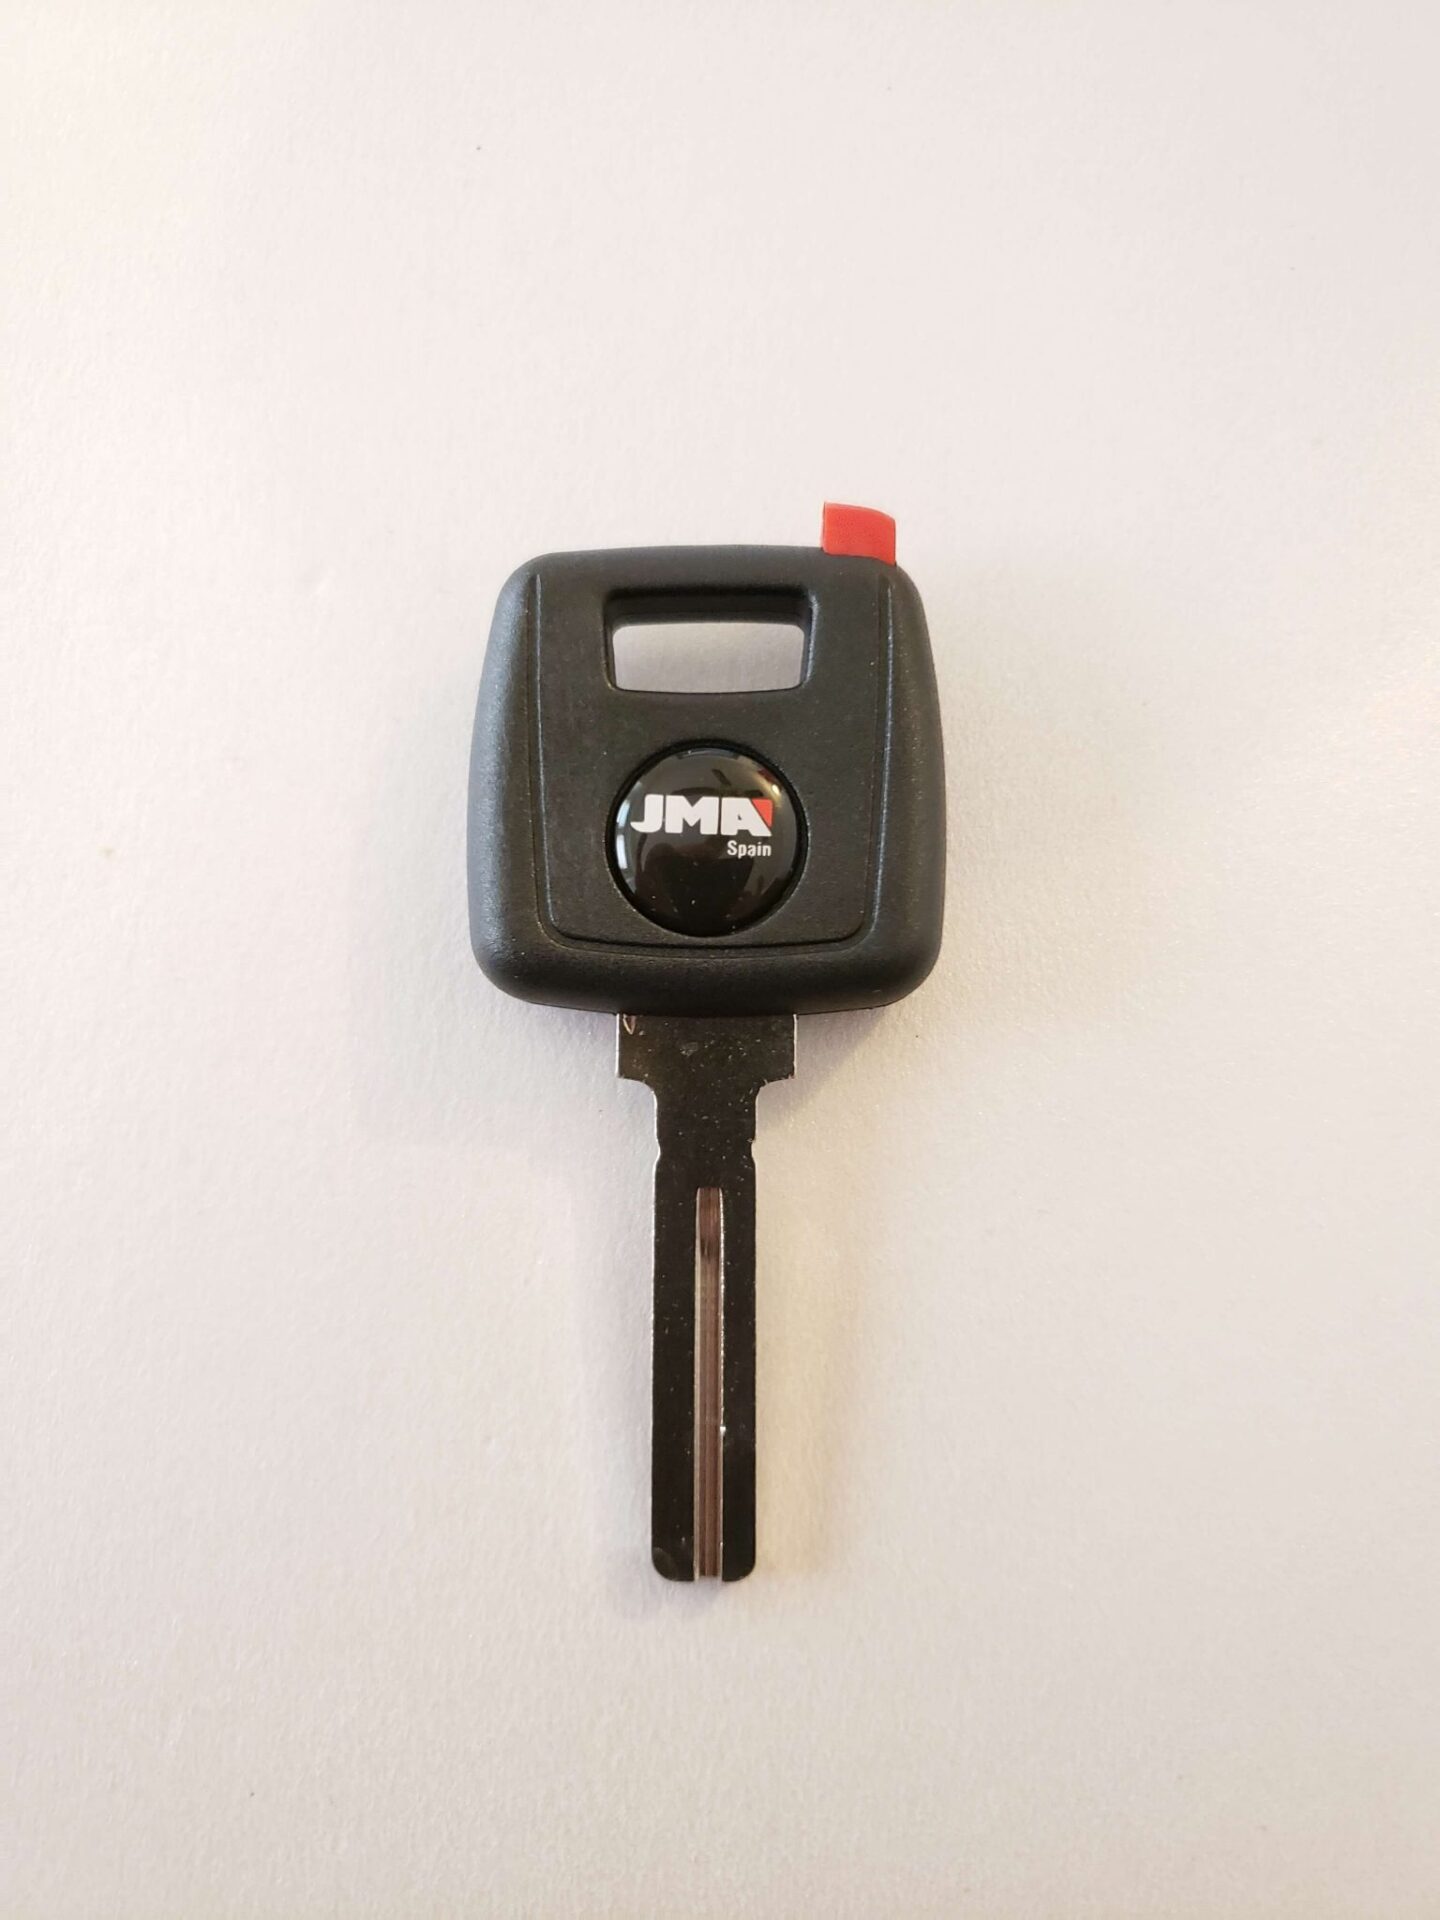 volvo master key replacement cost